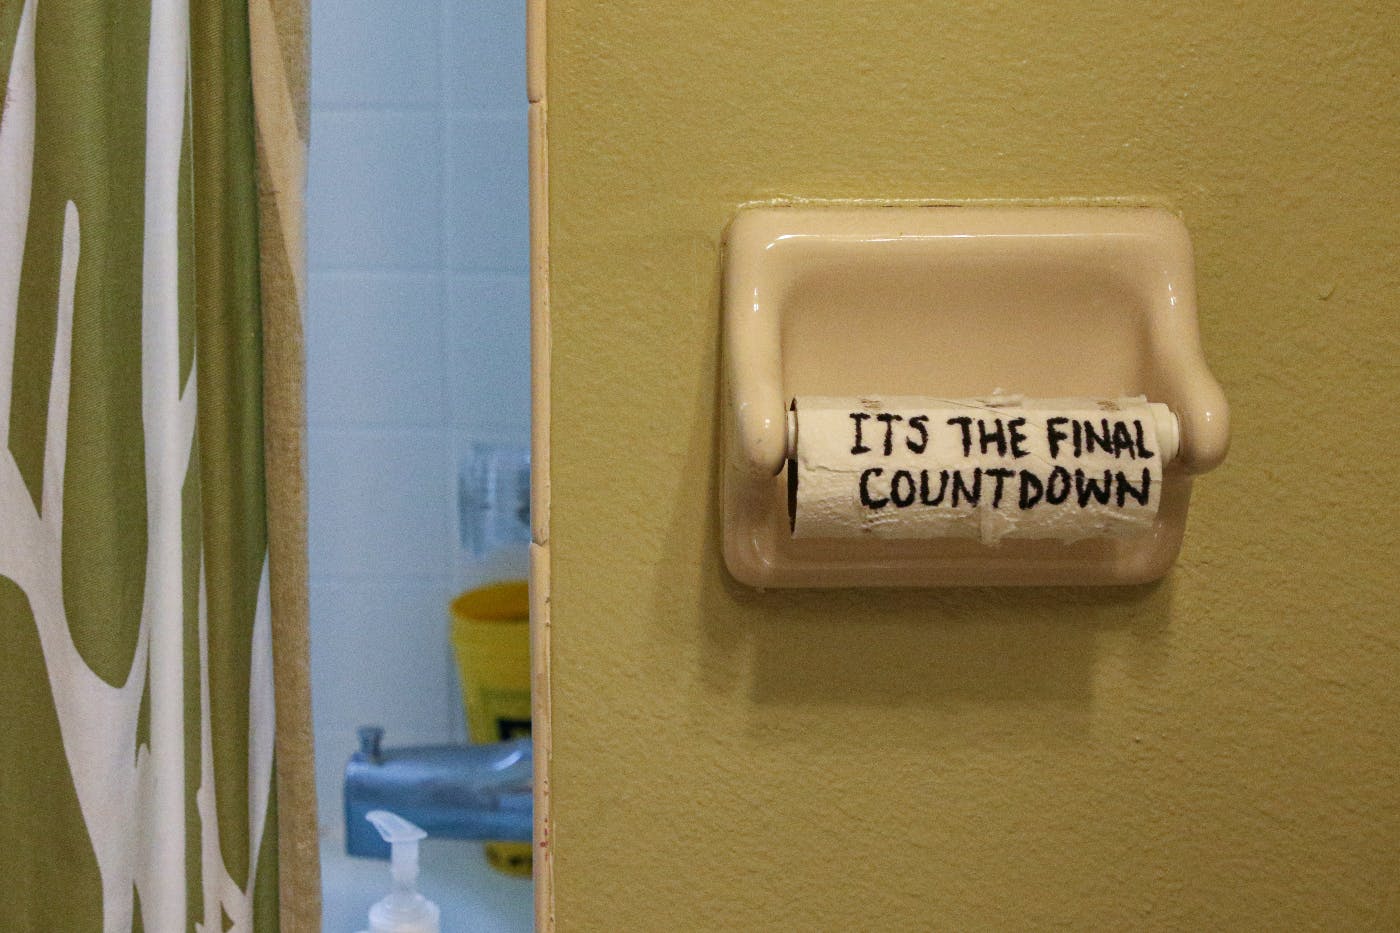 The end of a toilet paper roll that someone has written on: Its the final countdown.